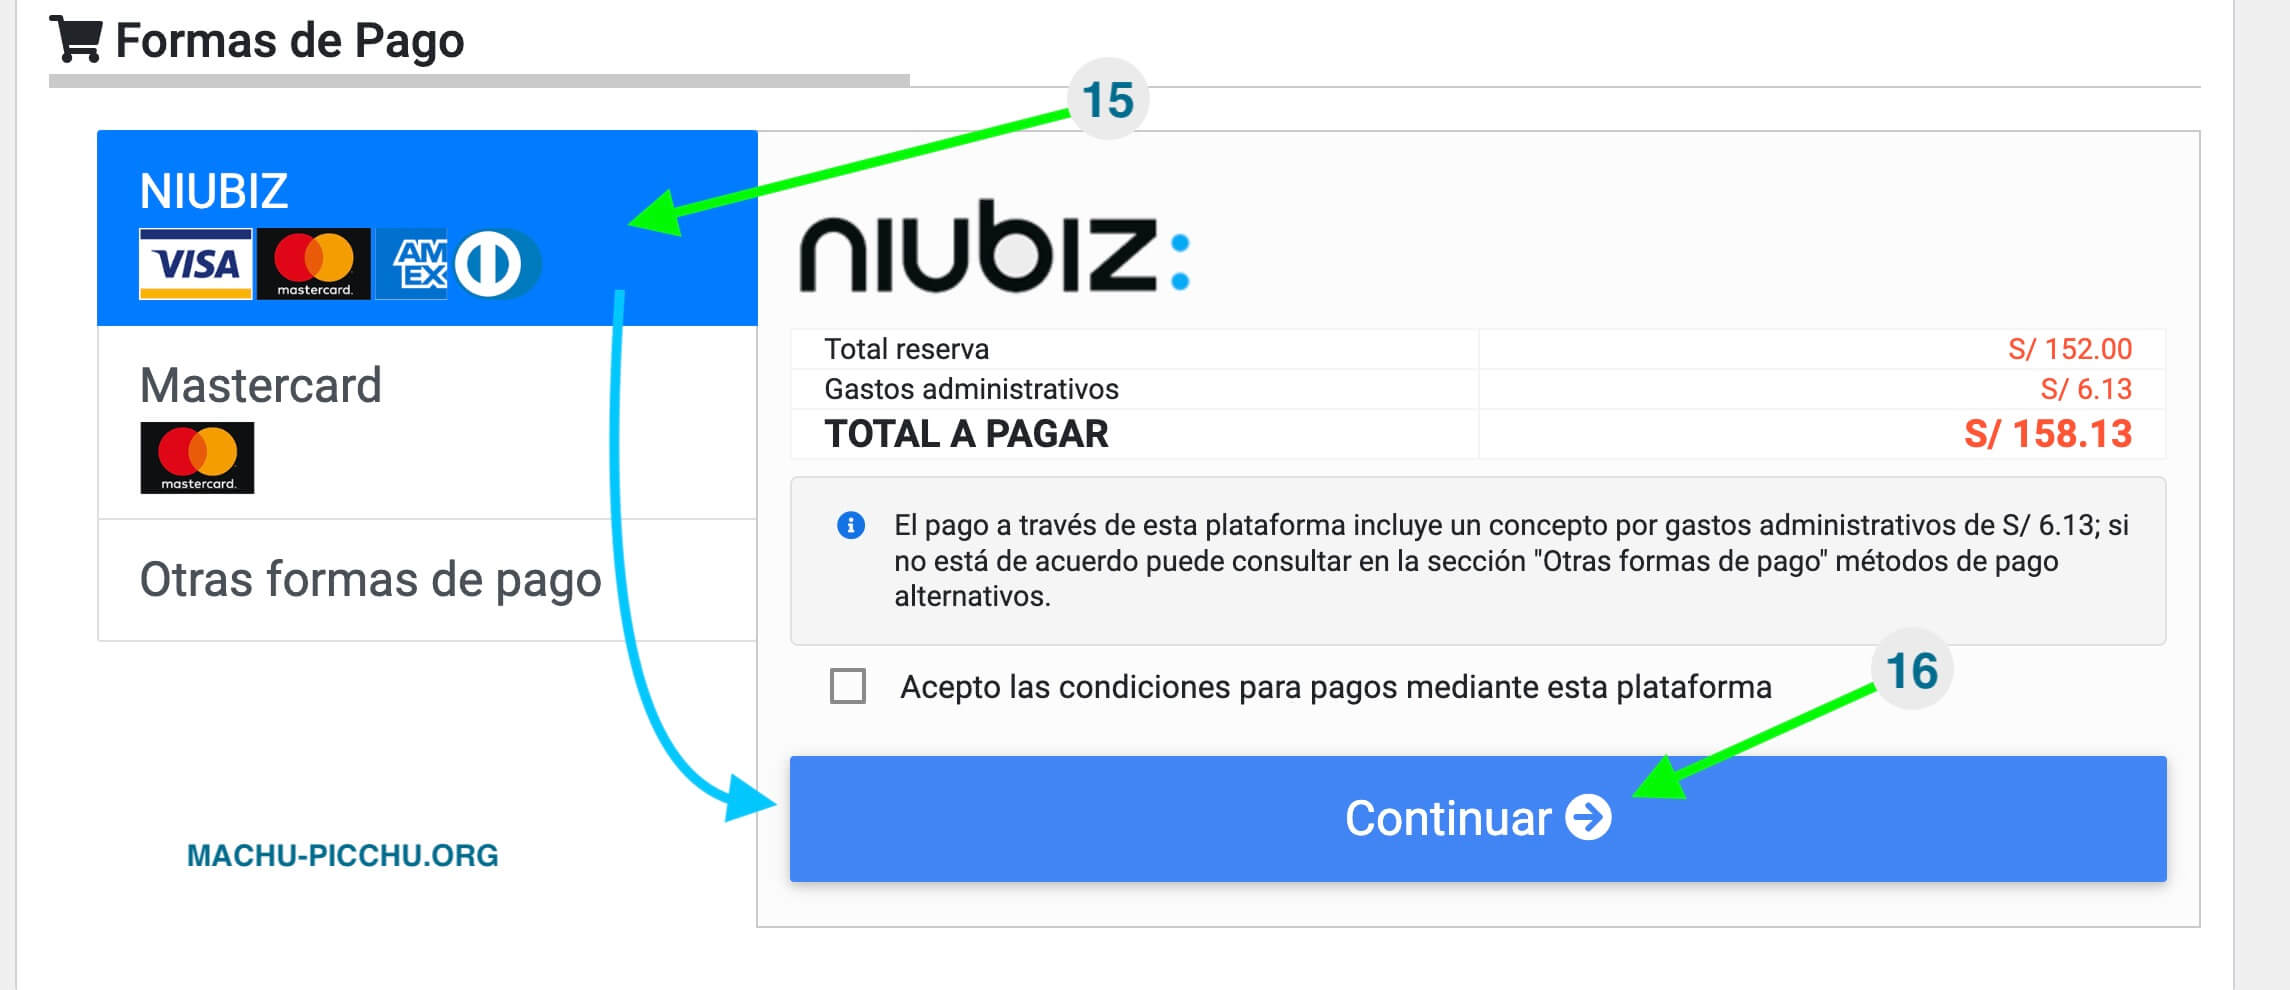 How to Buy Machu Picchu Tickets - Step 7 - Payments